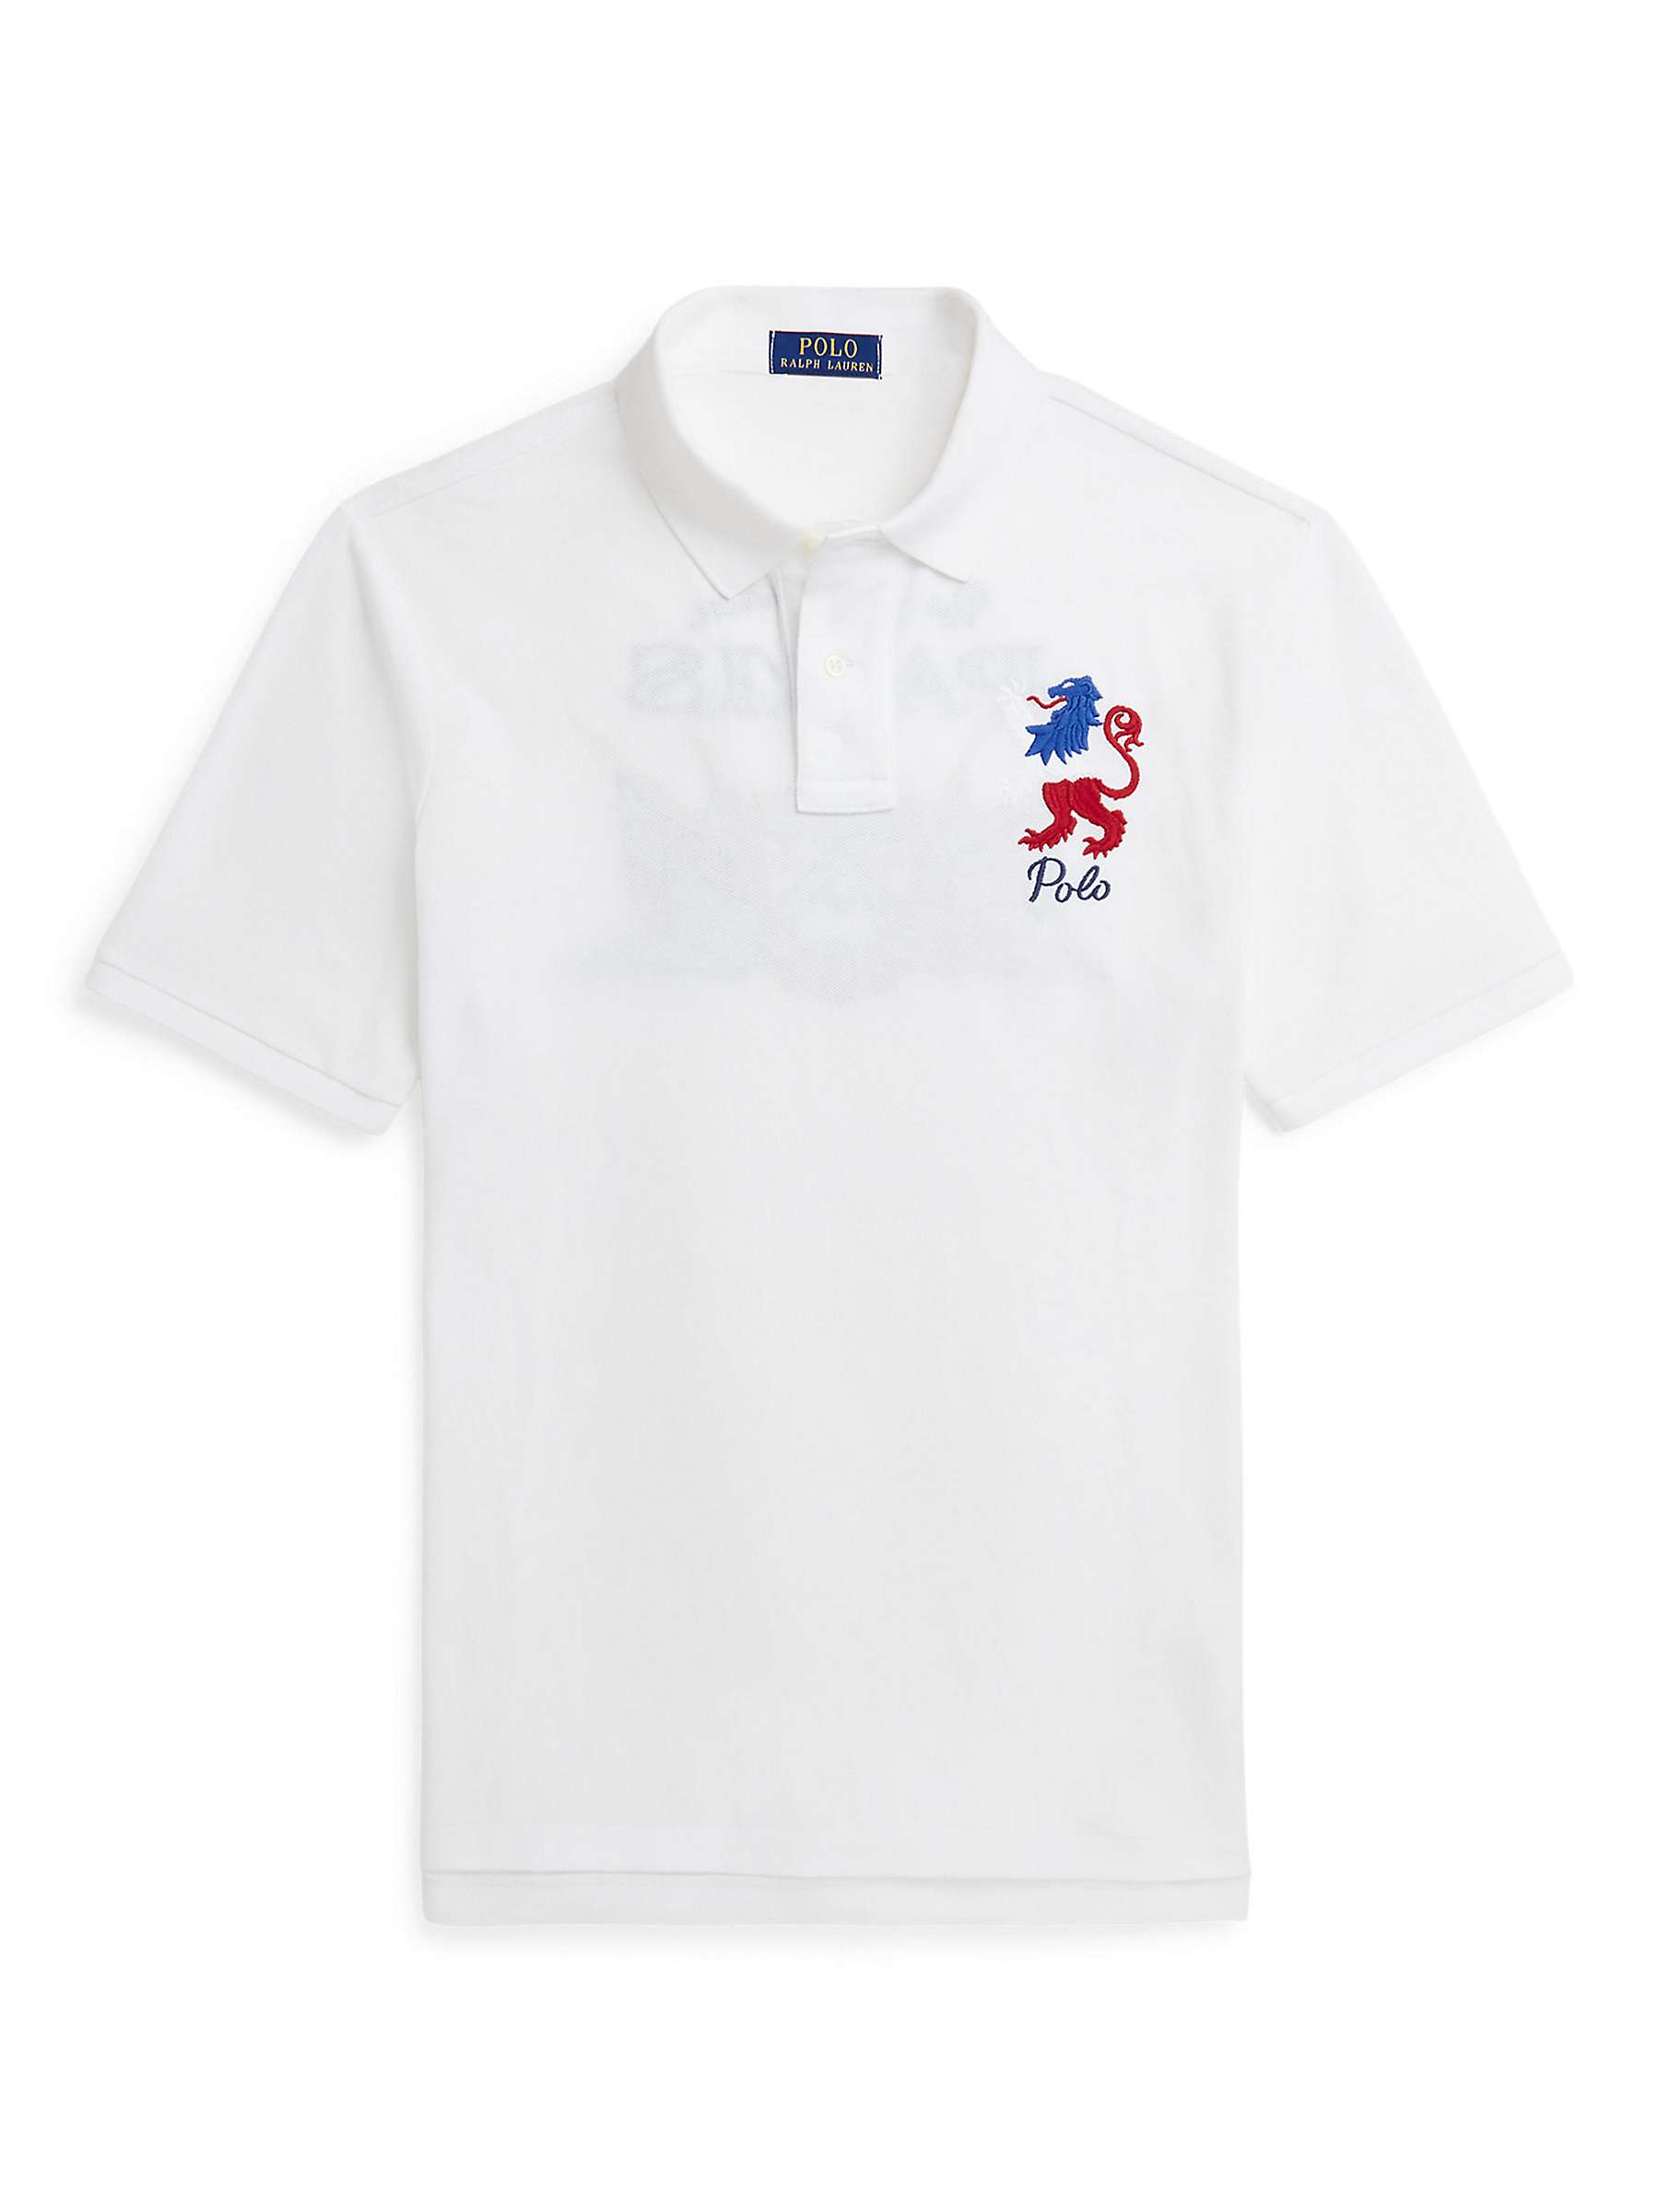 Buy Ralph Lauren Classic Fit Embroidered Mesh Polo Shirt, White Online at johnlewis.com